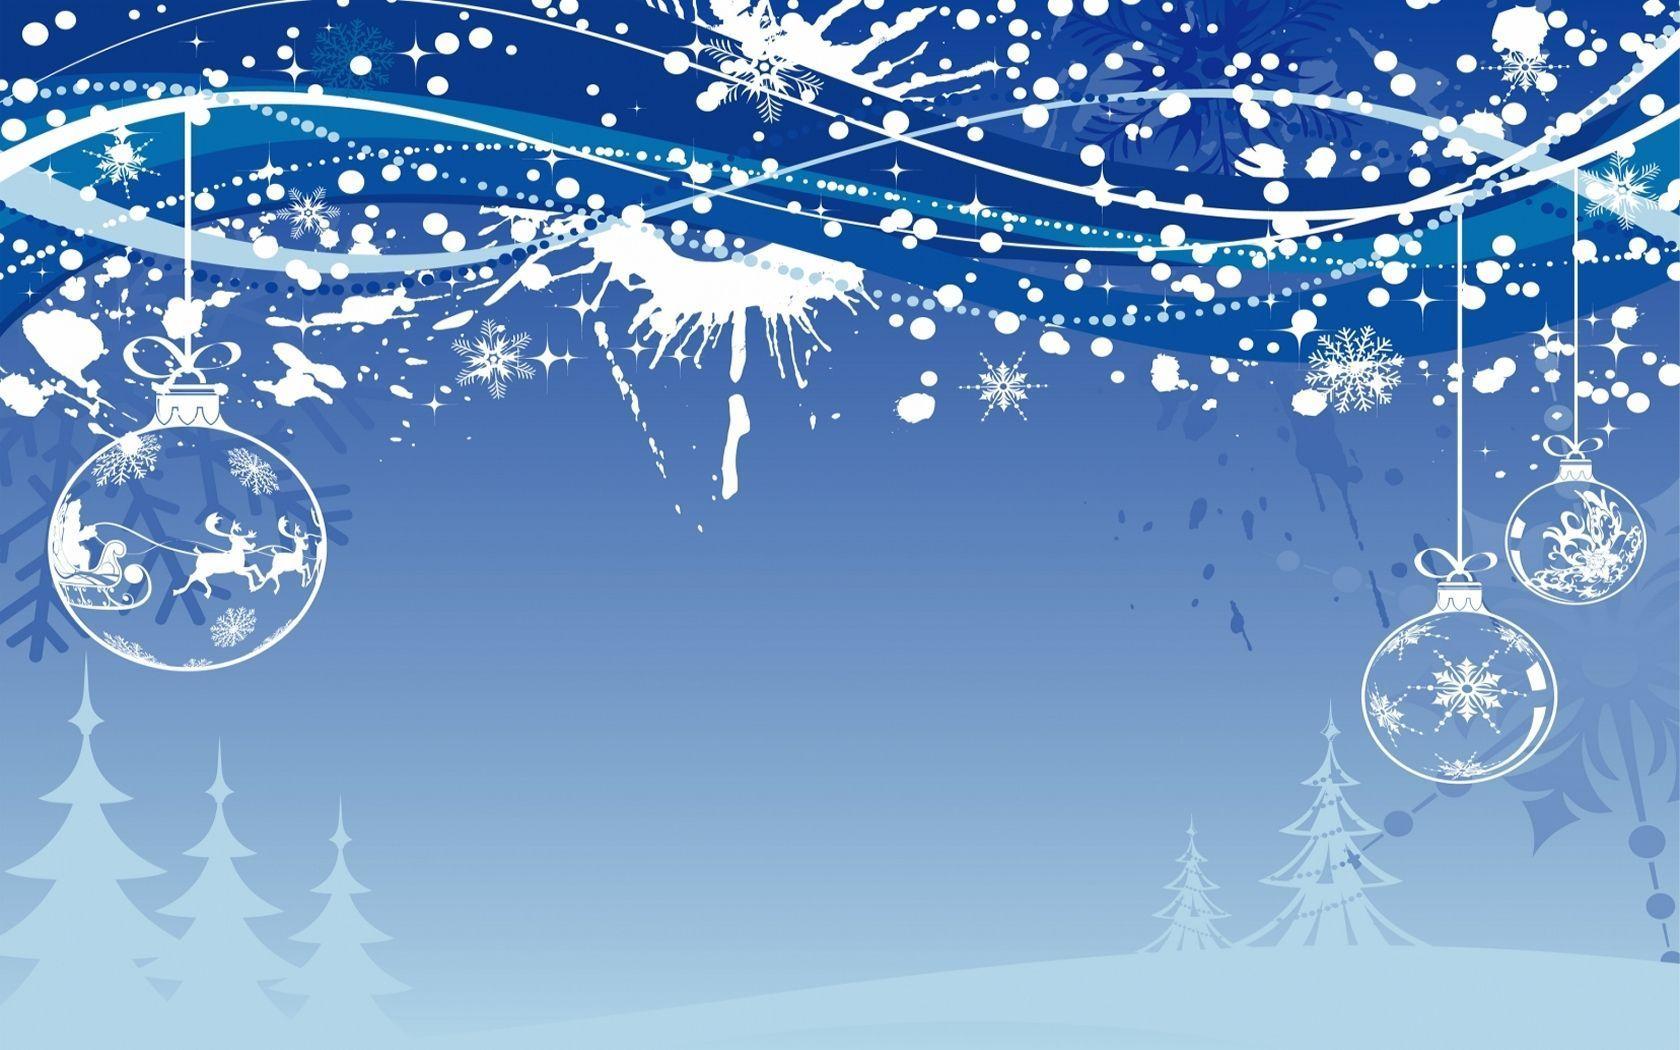 Winter Live Wallpaper HD FREE  Apps on Google Play